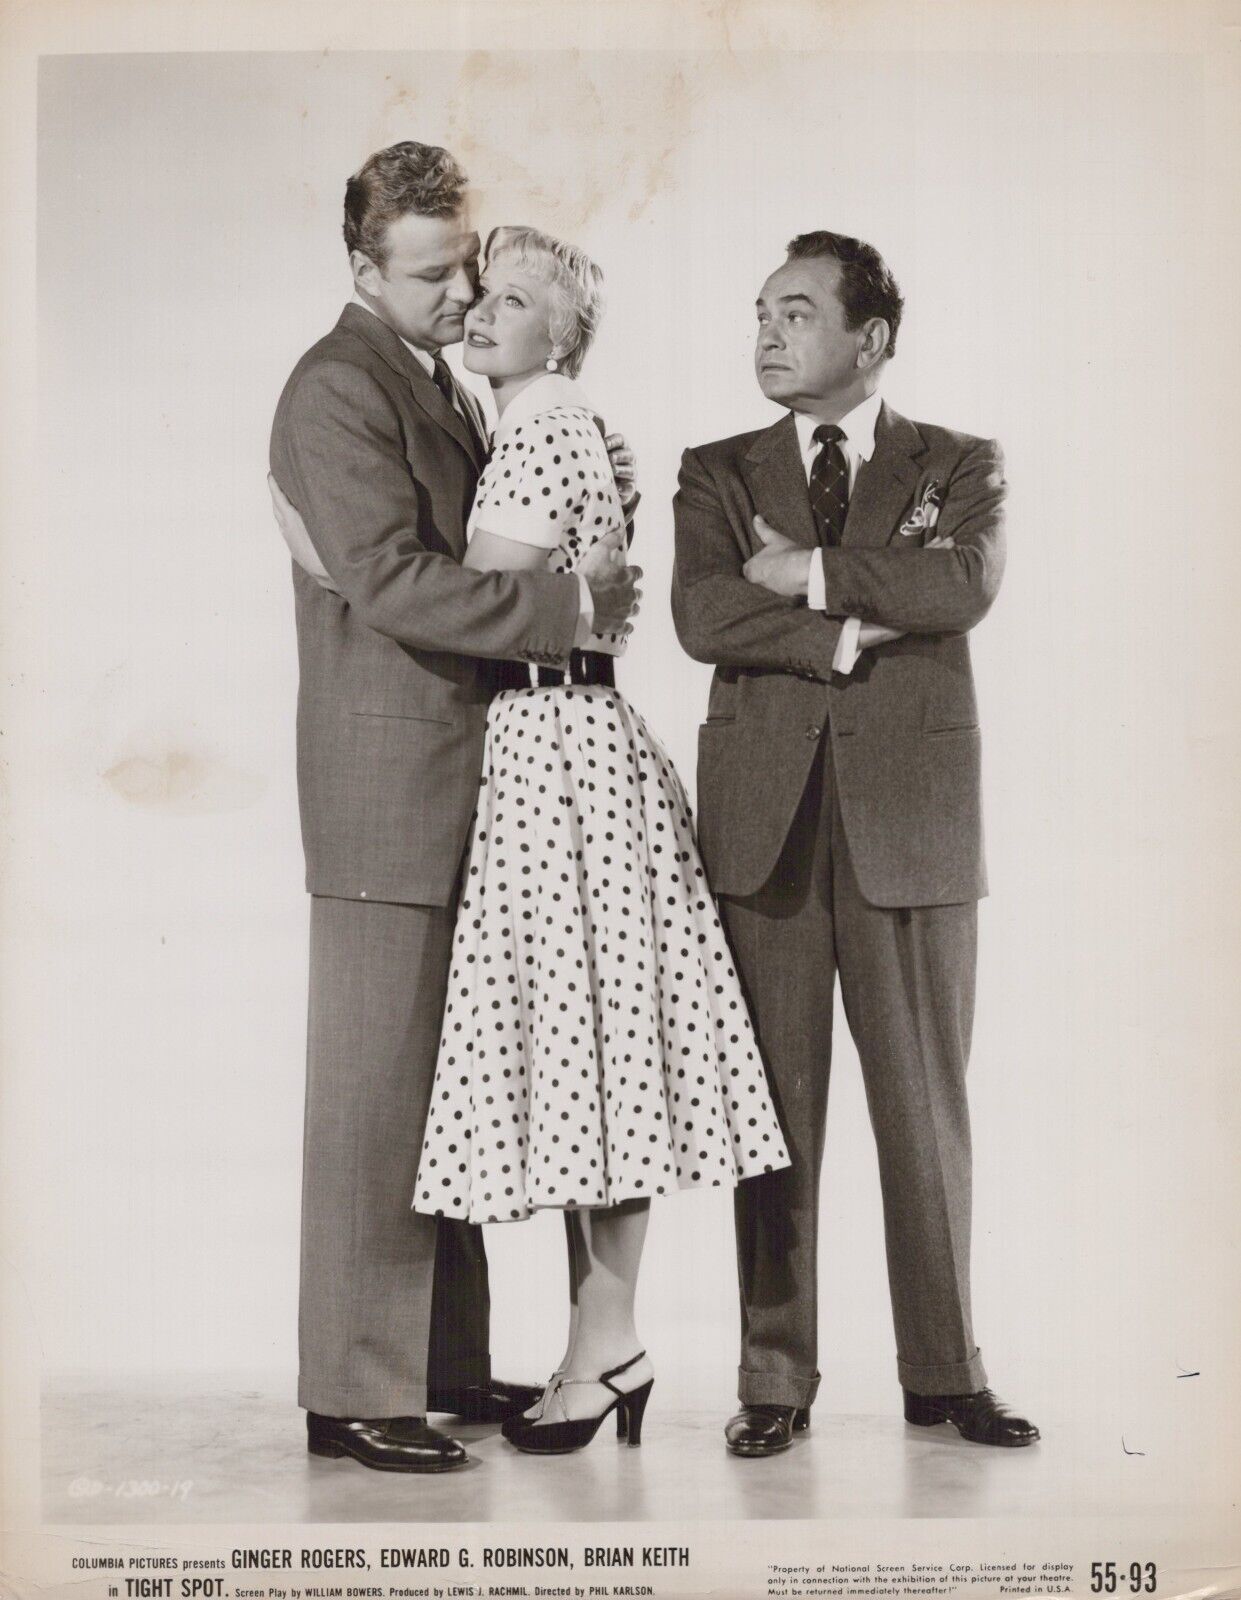 Ginger Rogers + Edward G. Robinson + Brian Keith in Tight Spot 1955 Photo K 171